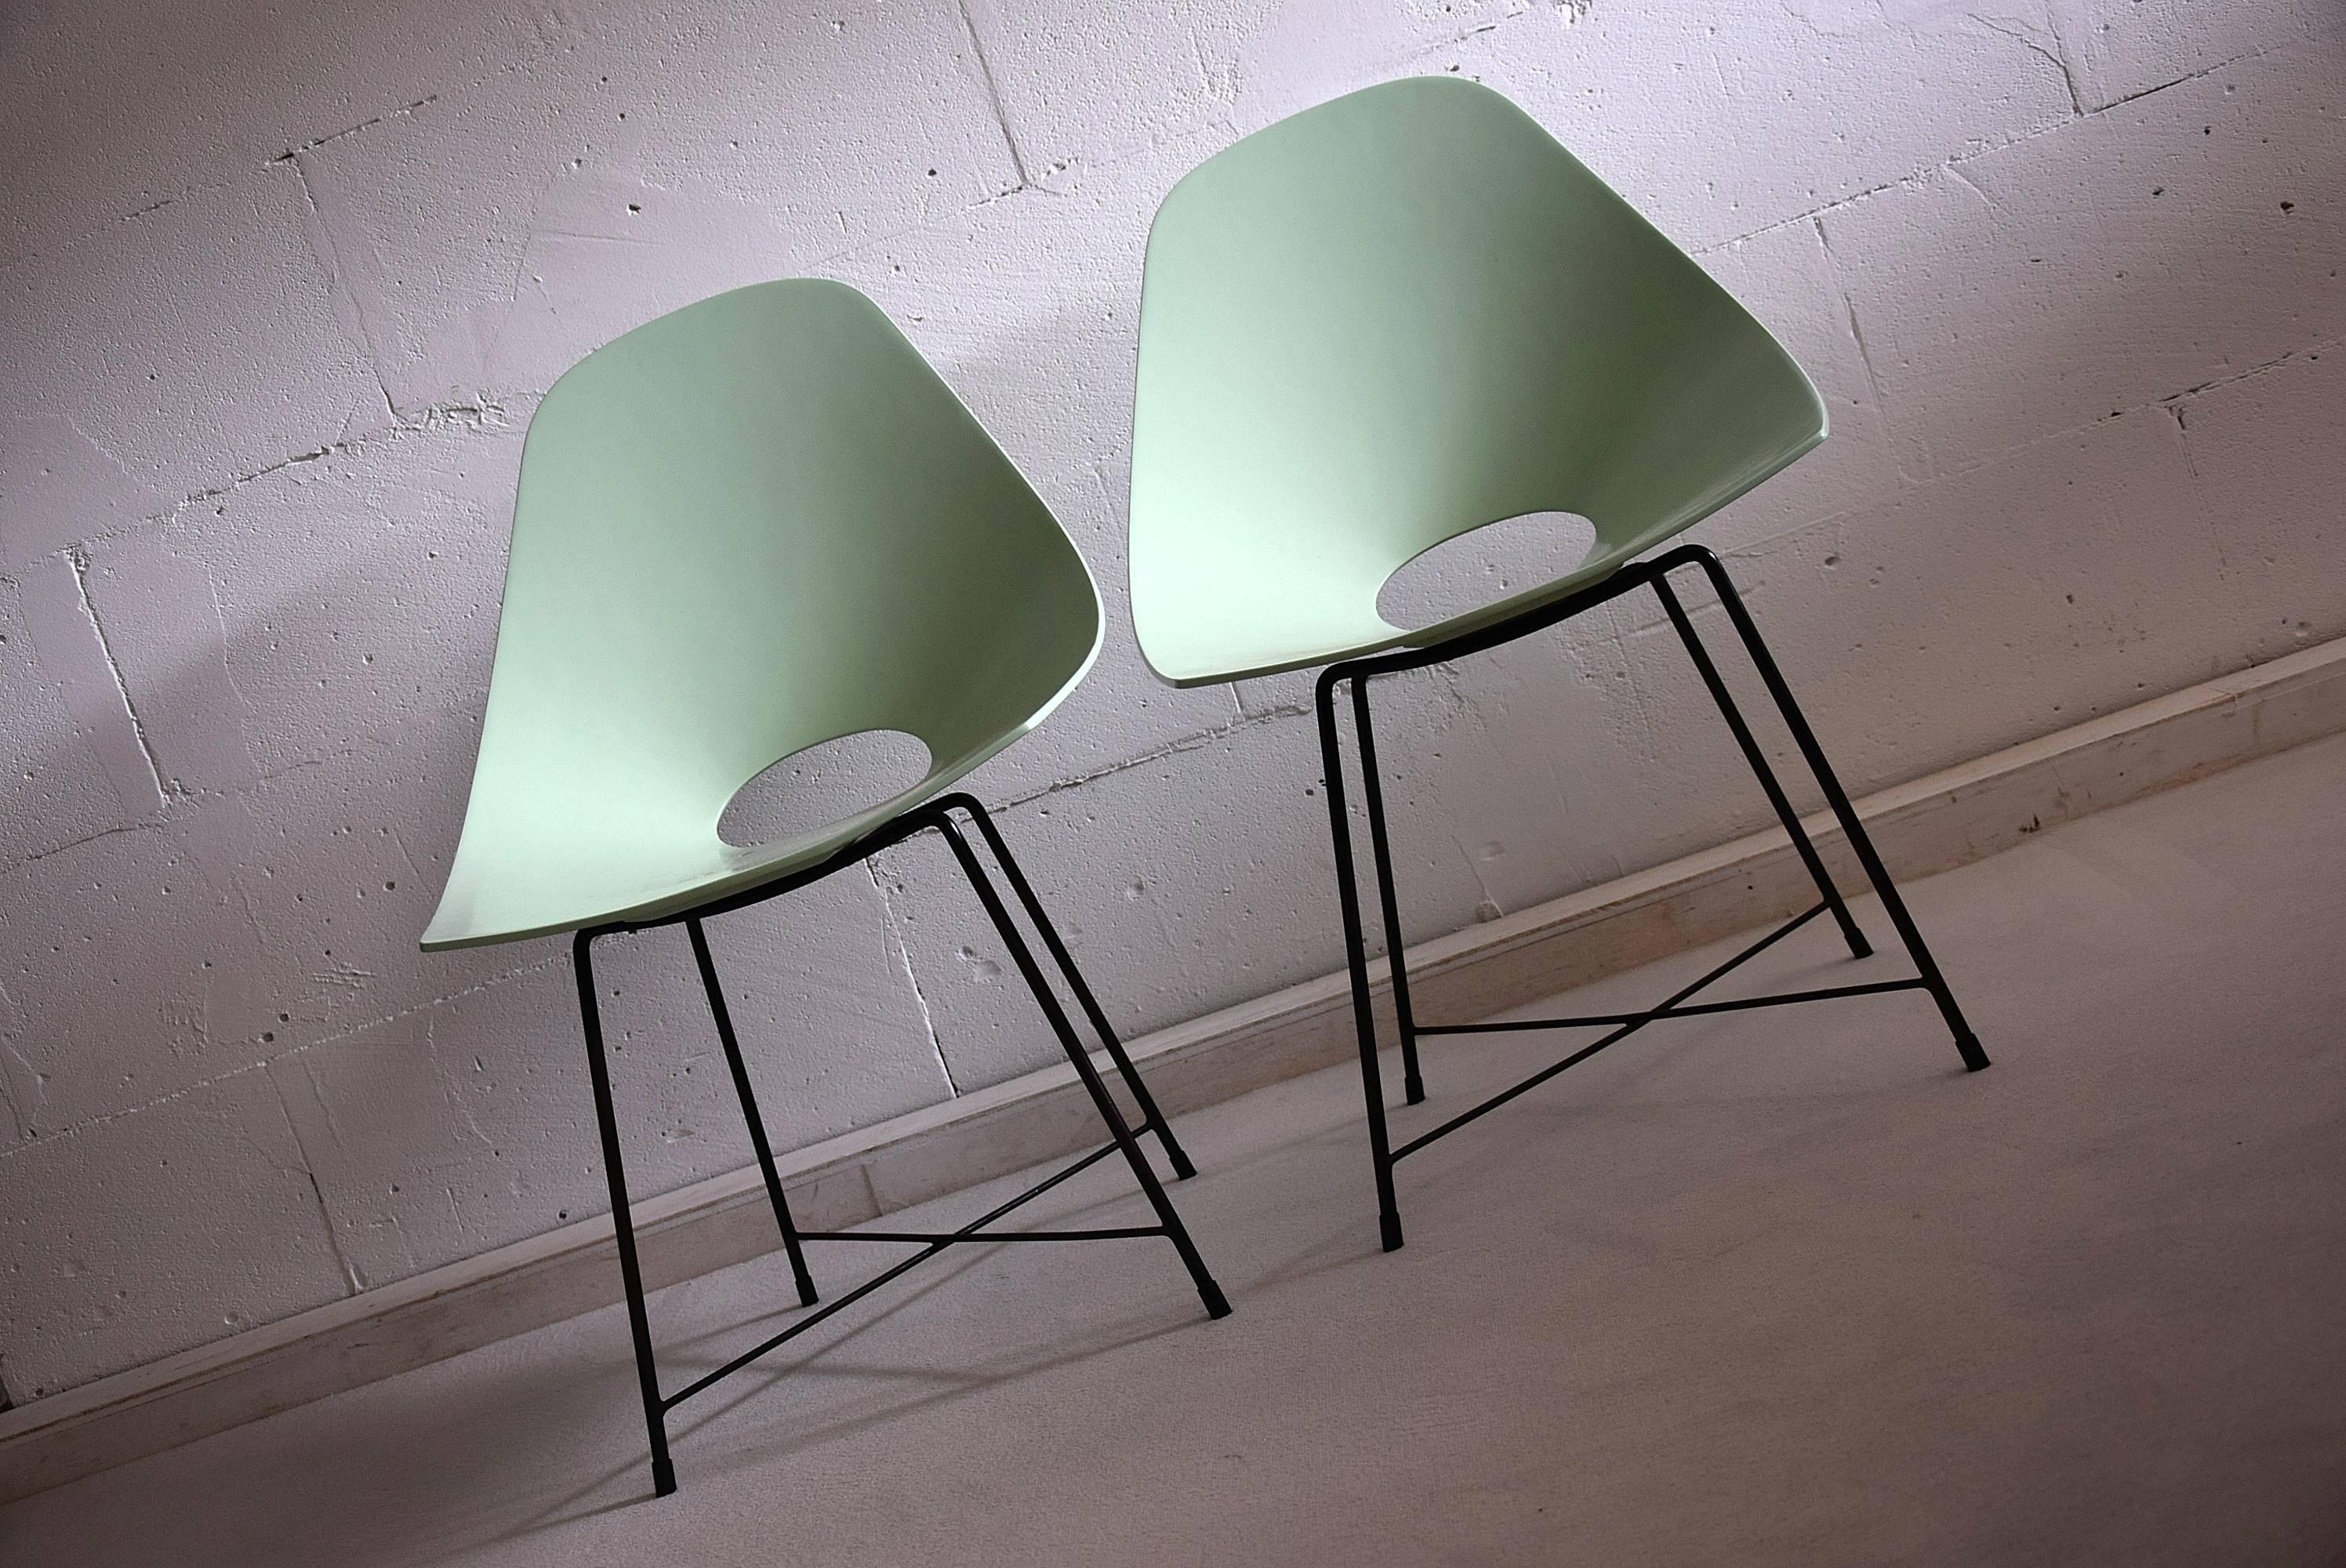 Augusto Bozzi rare prototype set.
This prototype set of chairs were designed by Augusto Bozzi experimenting with pressed MDF. It seems that both the seats and the frame were made by hand since there is a slight difference in measurements.

Both